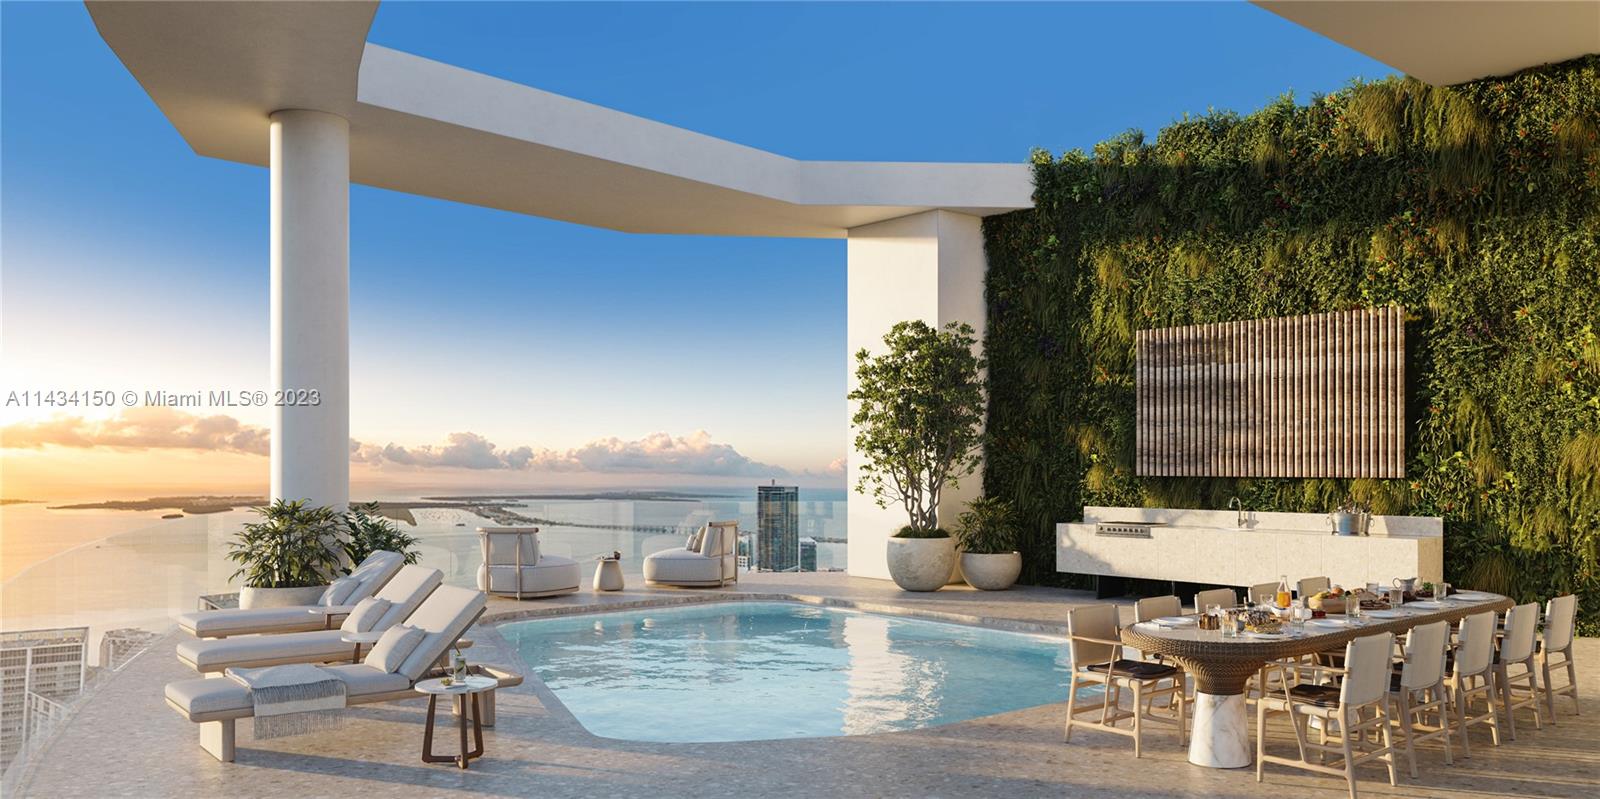 Elevate your living experience in this extraordinary 2-level PH at Baccarat Residences Miami. Overlooking Biscayne Bay, this lavish residence boasts 3 bedrooms, 7.5 baths + Den, maids’ room, and an expansive terrace with a private pool and summer kitchen. With 11-foot ceilings, a private elevator, and meticulous finishes throughout, this is the epitome of luxury living. Indulge in panoramic views and unparalleled amenities. Enjoy an infinity pool, wine cellar, marina, gym, and spa. Benefit from dedicated concierge, 24/7 room service, and access to 1Hotel Beach Club.
Contact us for an exclusive tour of this exceptional offering.